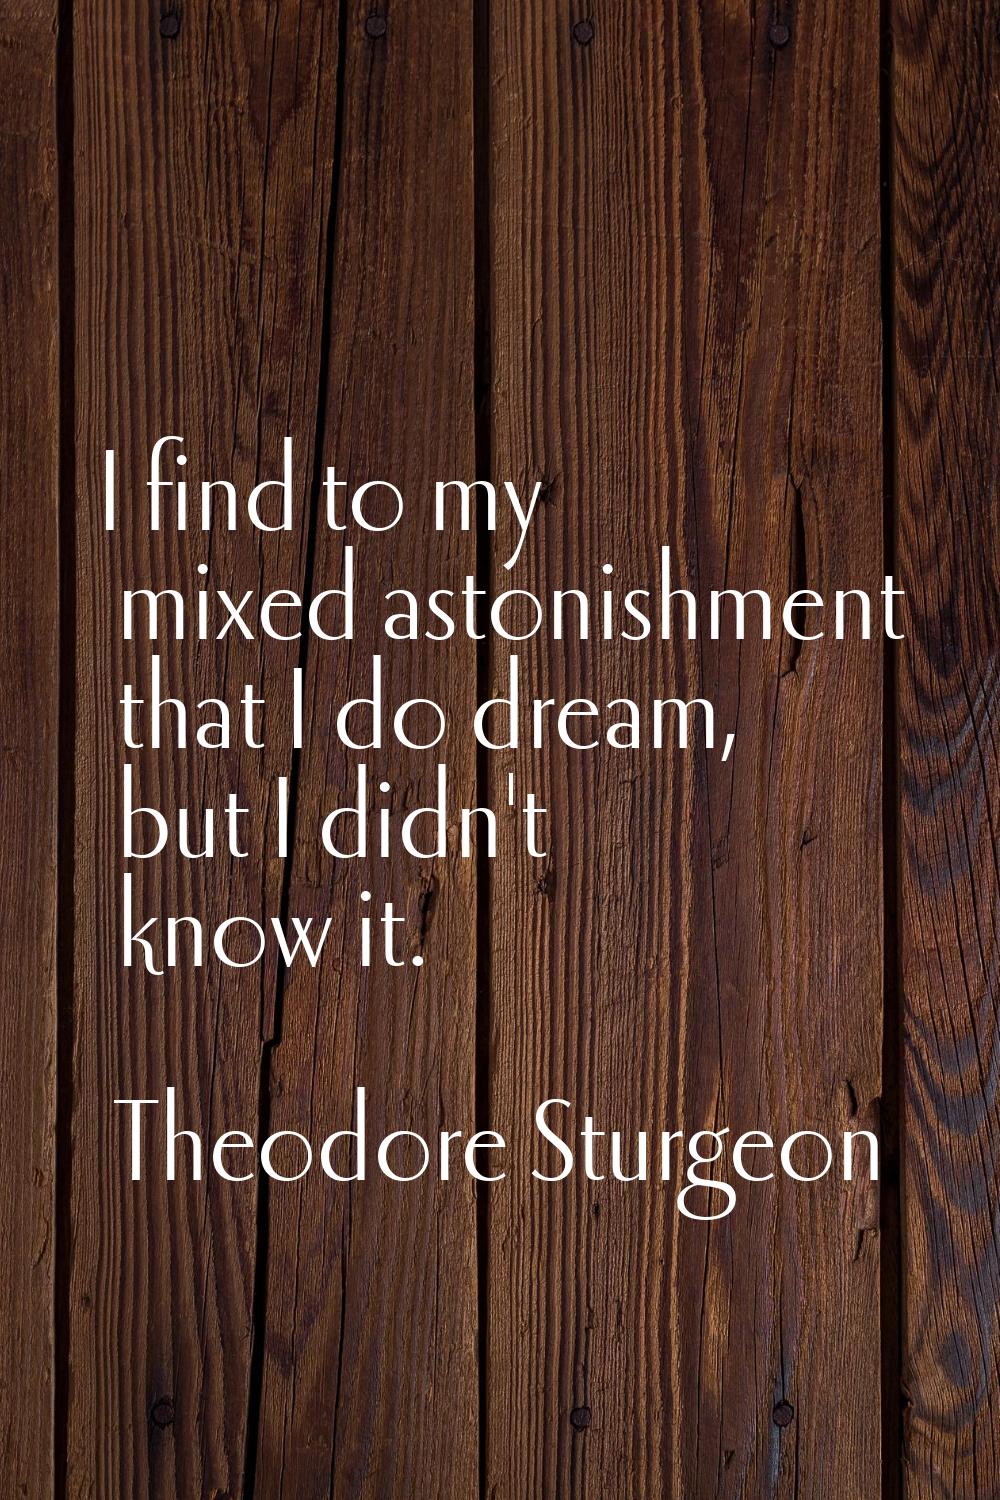 I find to my mixed astonishment that I do dream, but I didn't know it.